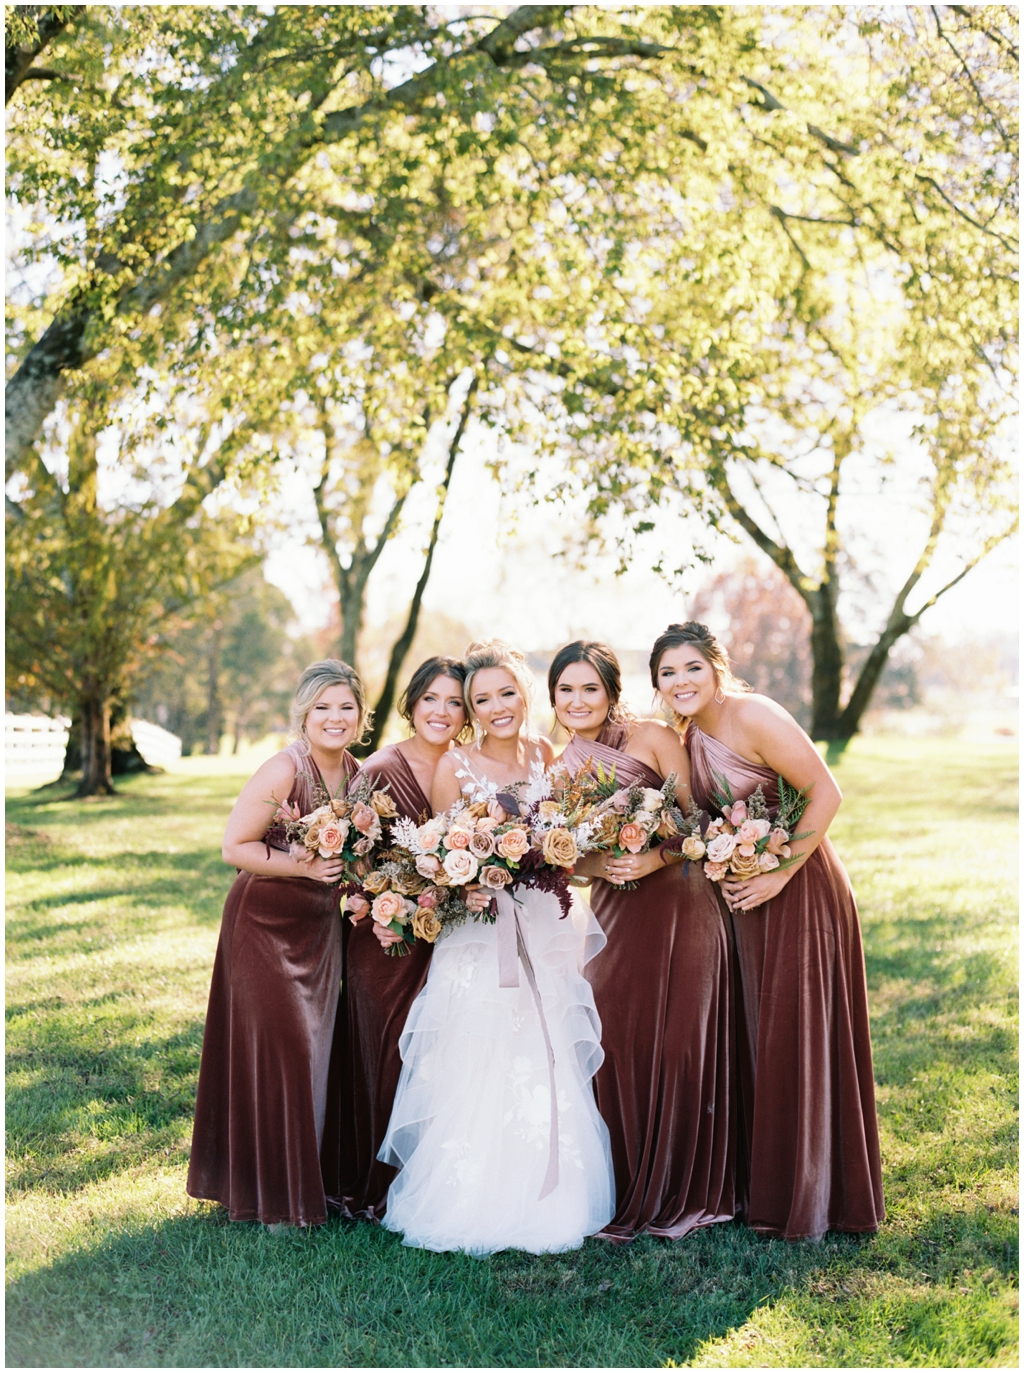 Deep burgundy velvet bridesmaids dresses and beautiful fall muted rose colored bouquets